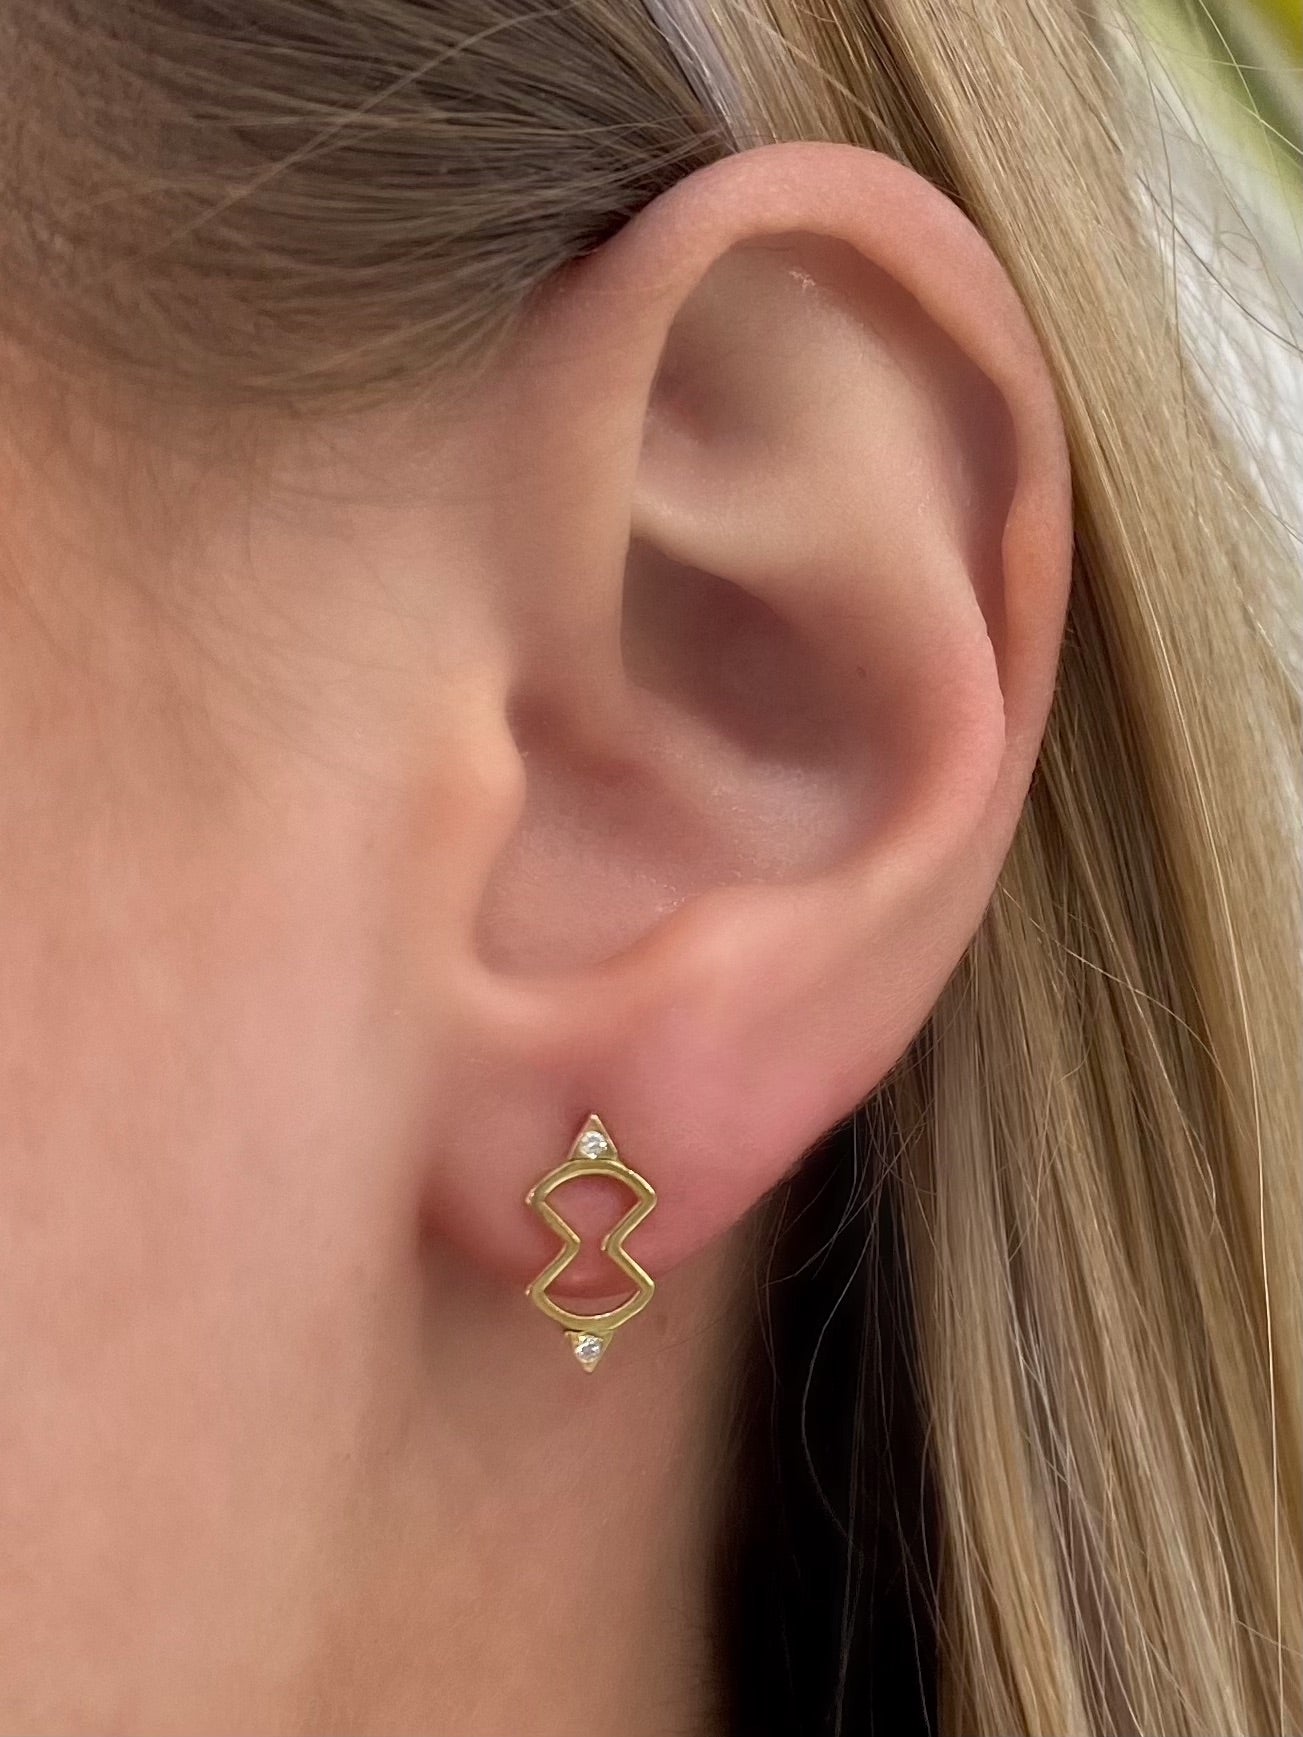 Specifications,Price and Buy Gold Piercing - Louis Vuitton Design